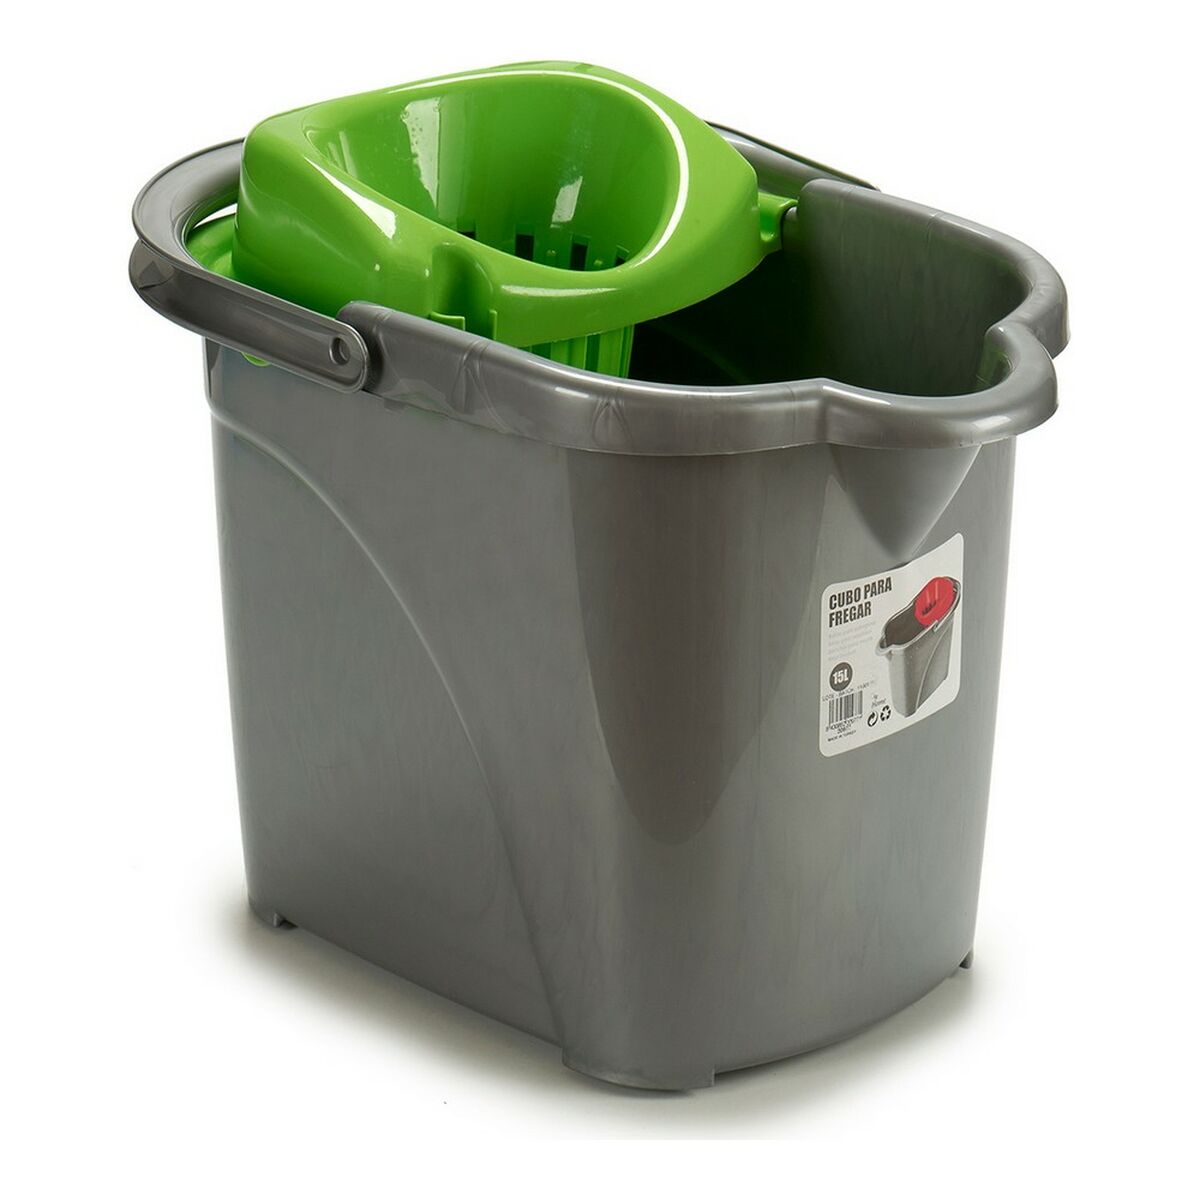 Mop Bucket with Automatic Drainer 8430852209771 Blues / Greens Black Blue Green Plastic 31 x 31 x 41 cm